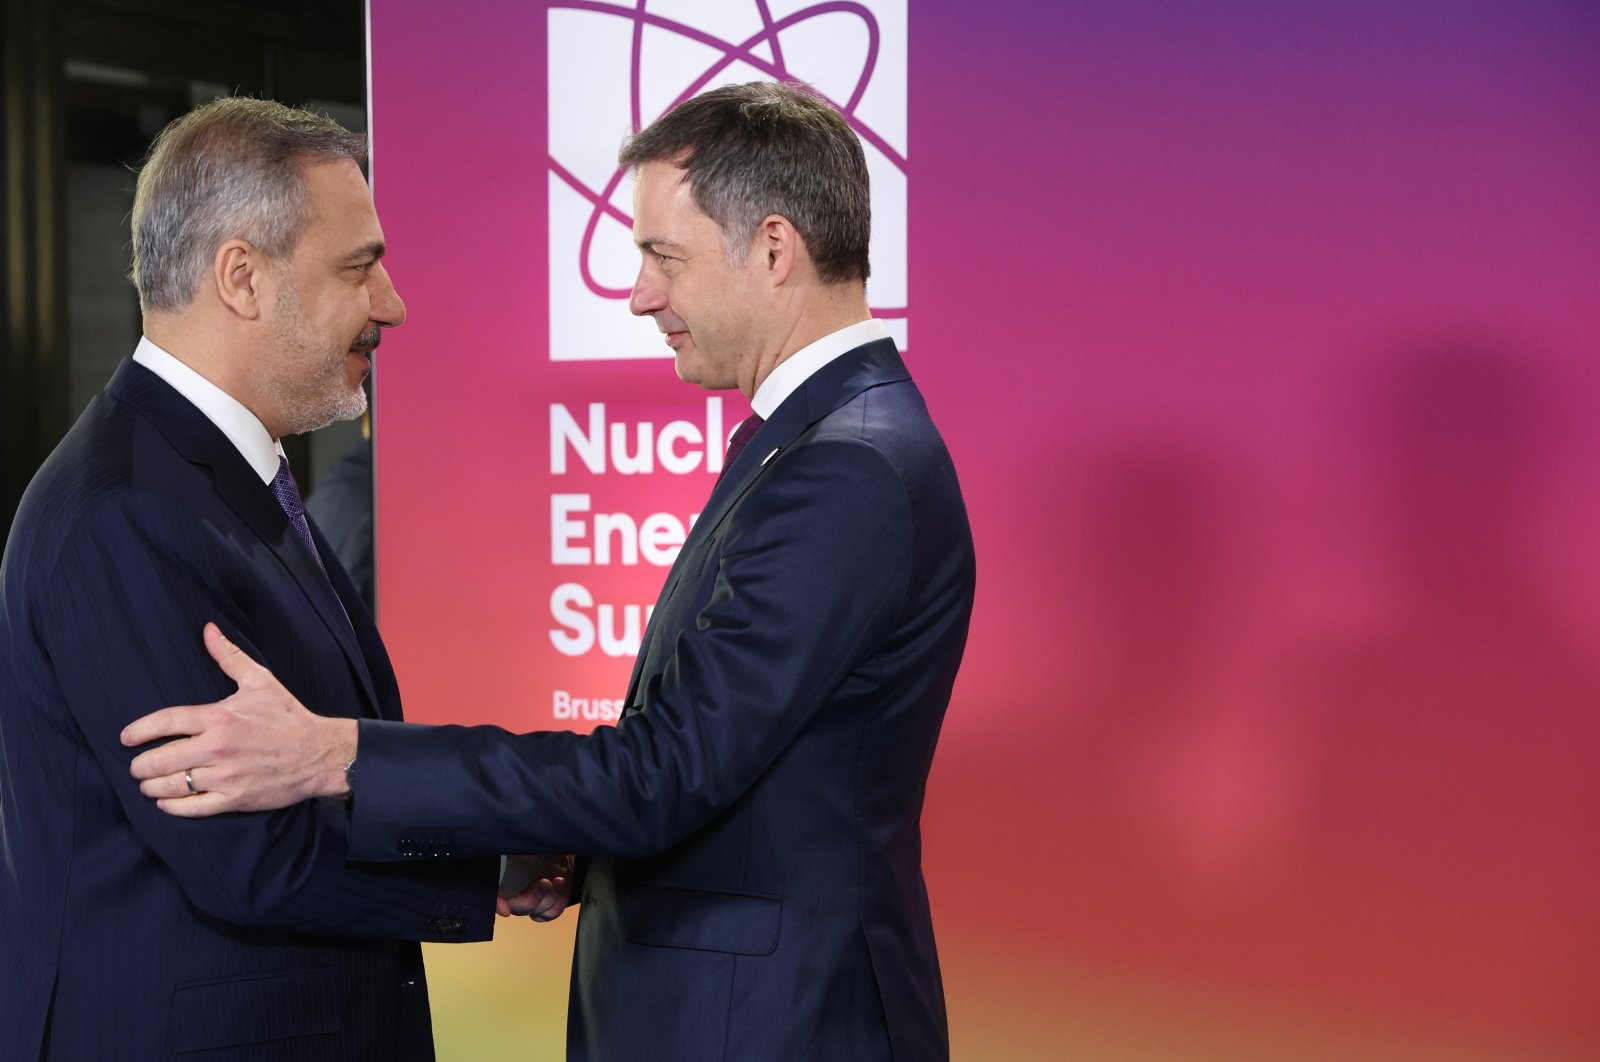 Foreign Minister Hakan Fidan (L) is welcomed by Belgian Prime Minister Alexander De Croo (R) prior to the Nuclear Energy Summit in Brussels, Belgium, March 21, 2024. (EPA Photo)